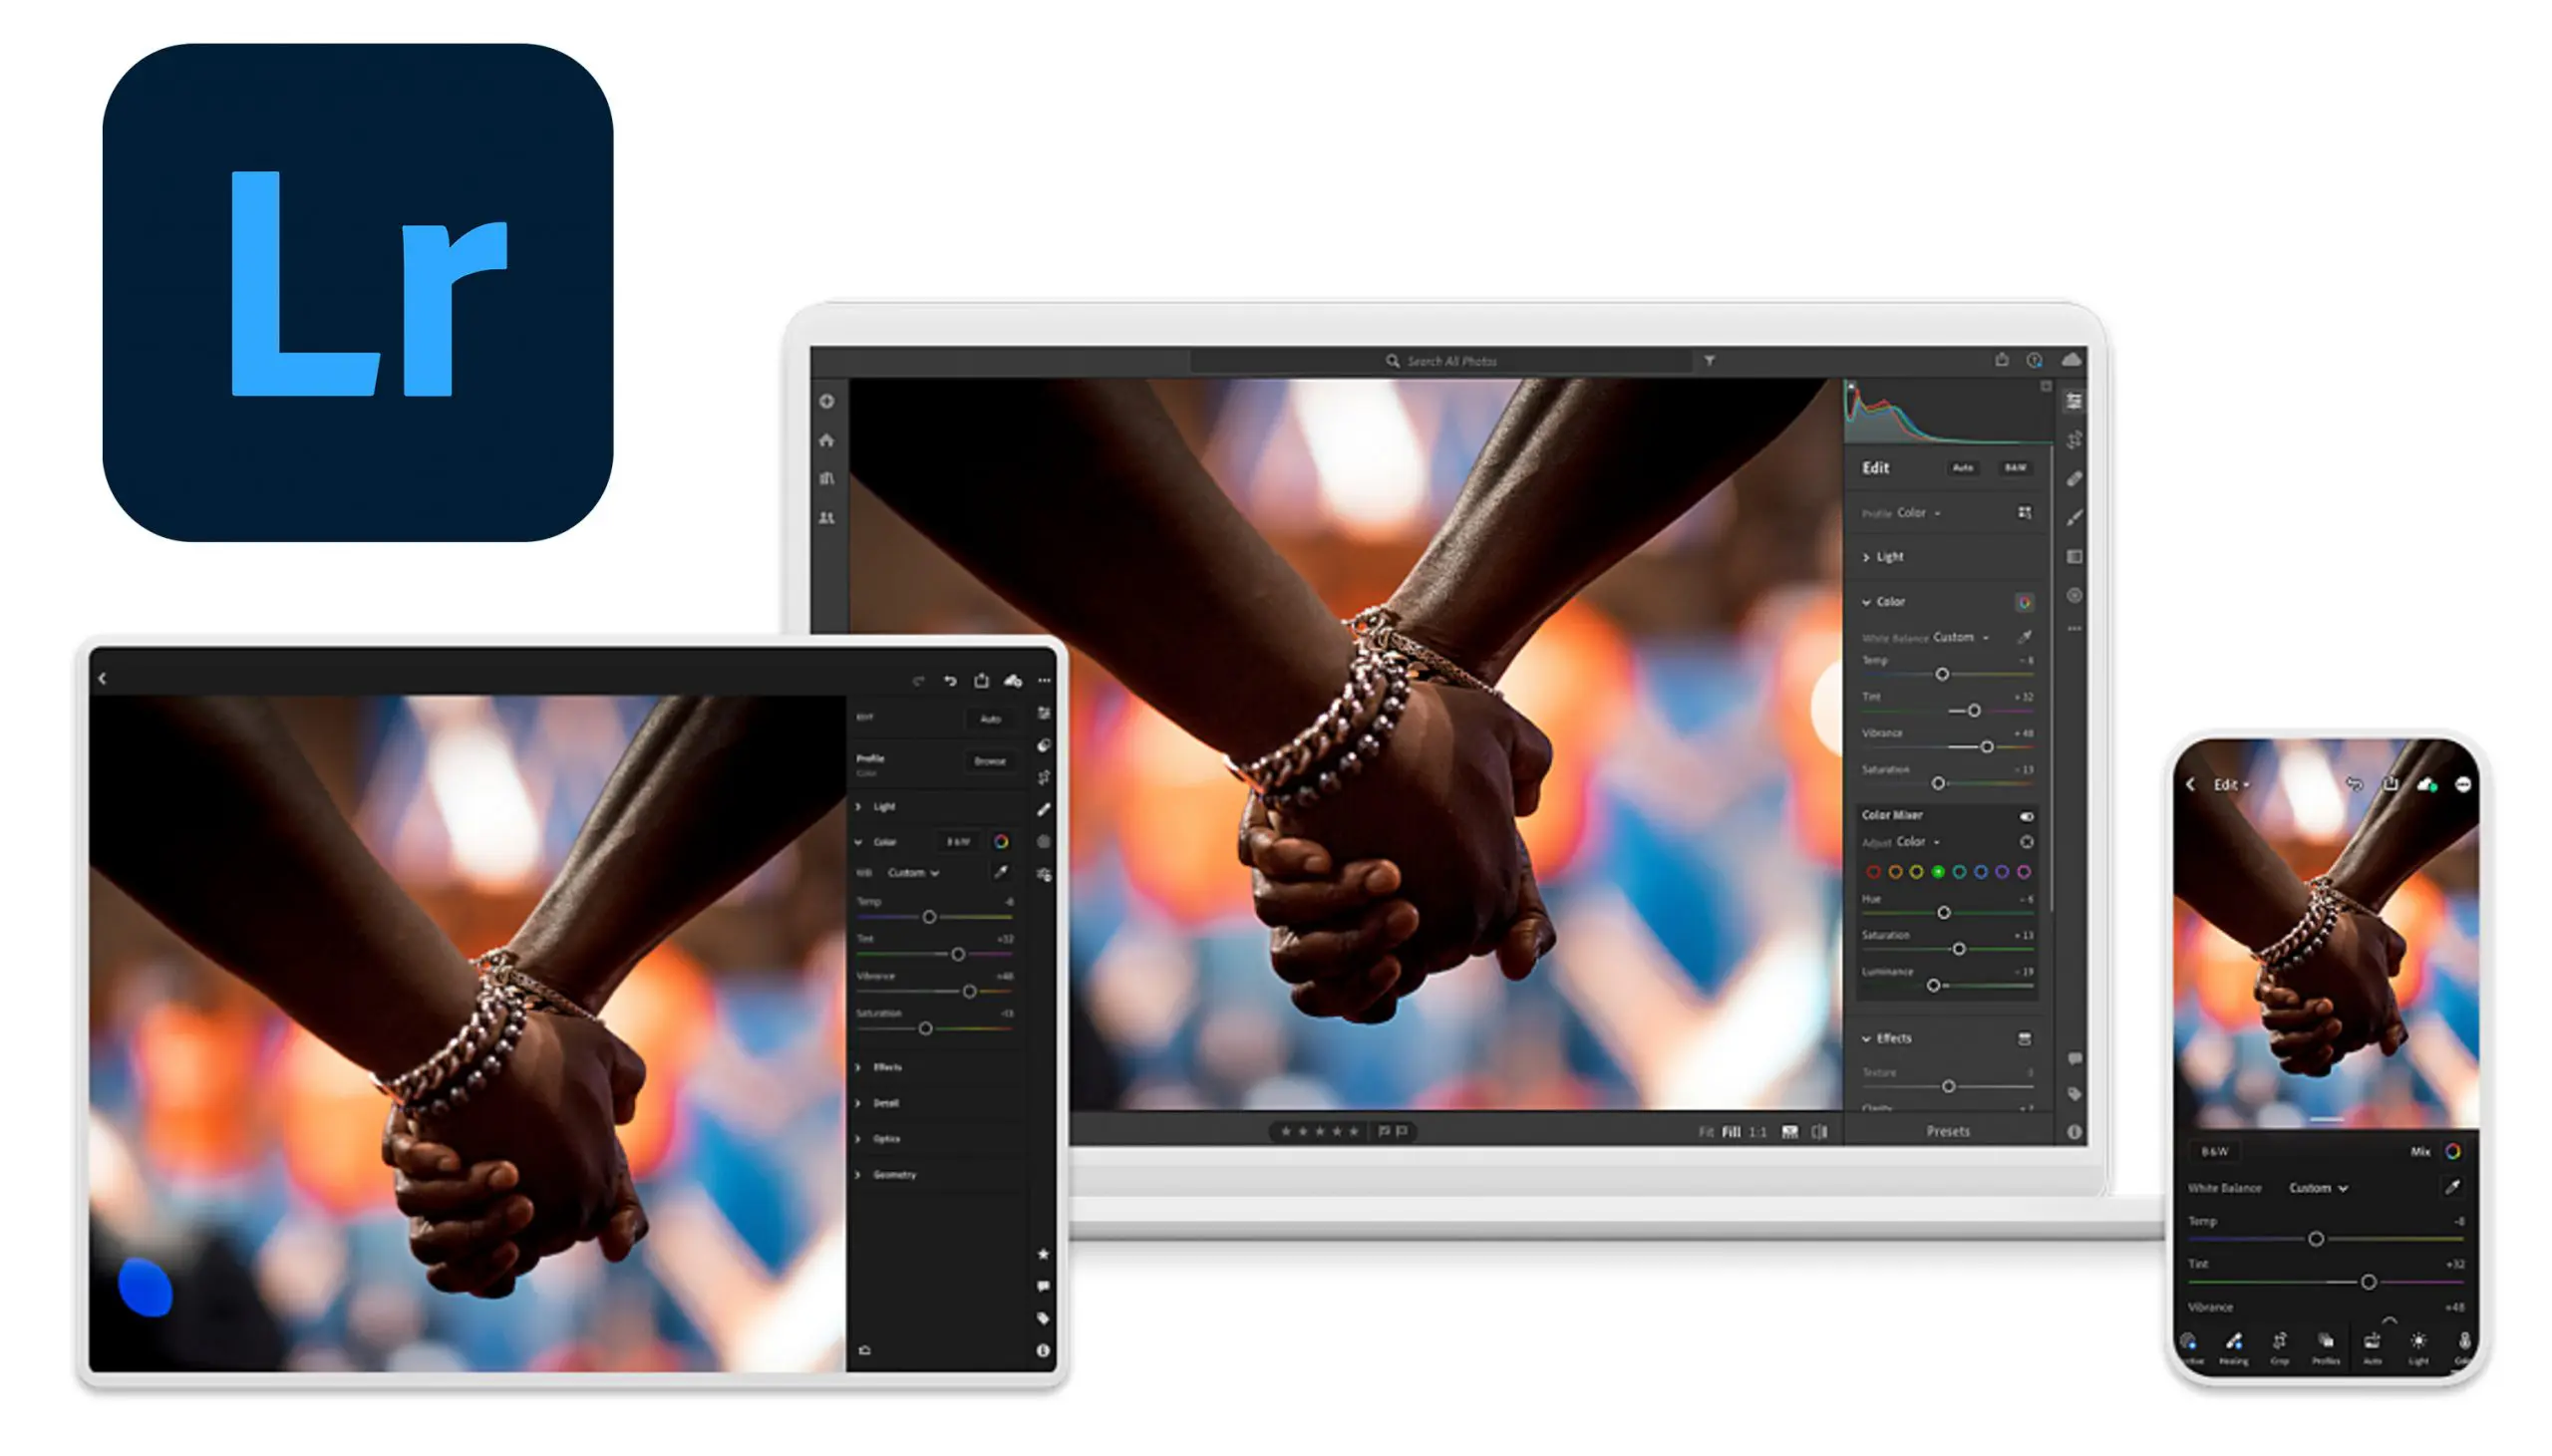 adobe lightroom for photo editing is a must-have software for wedding photography